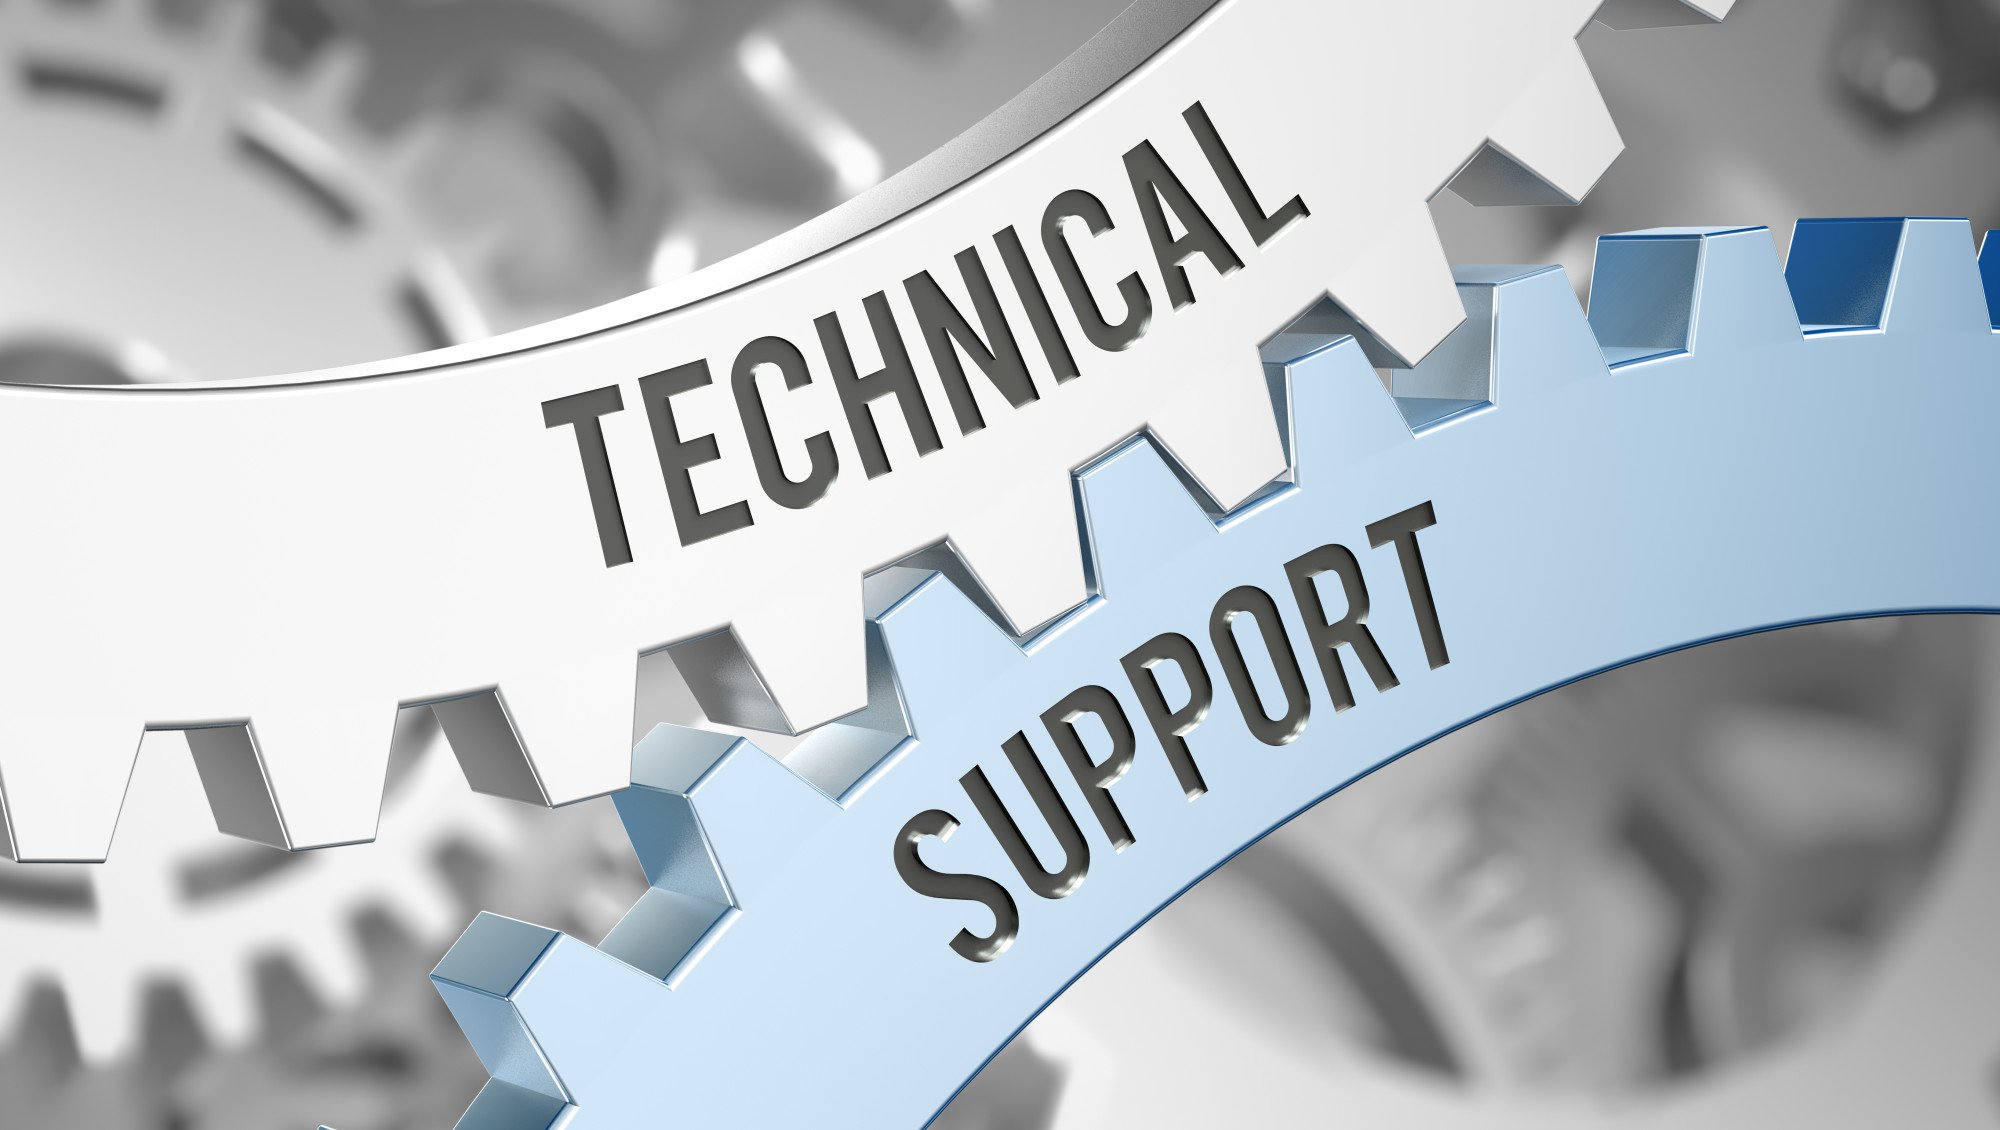 9 Common Technical Problems To Send To The Help Desk Houston And